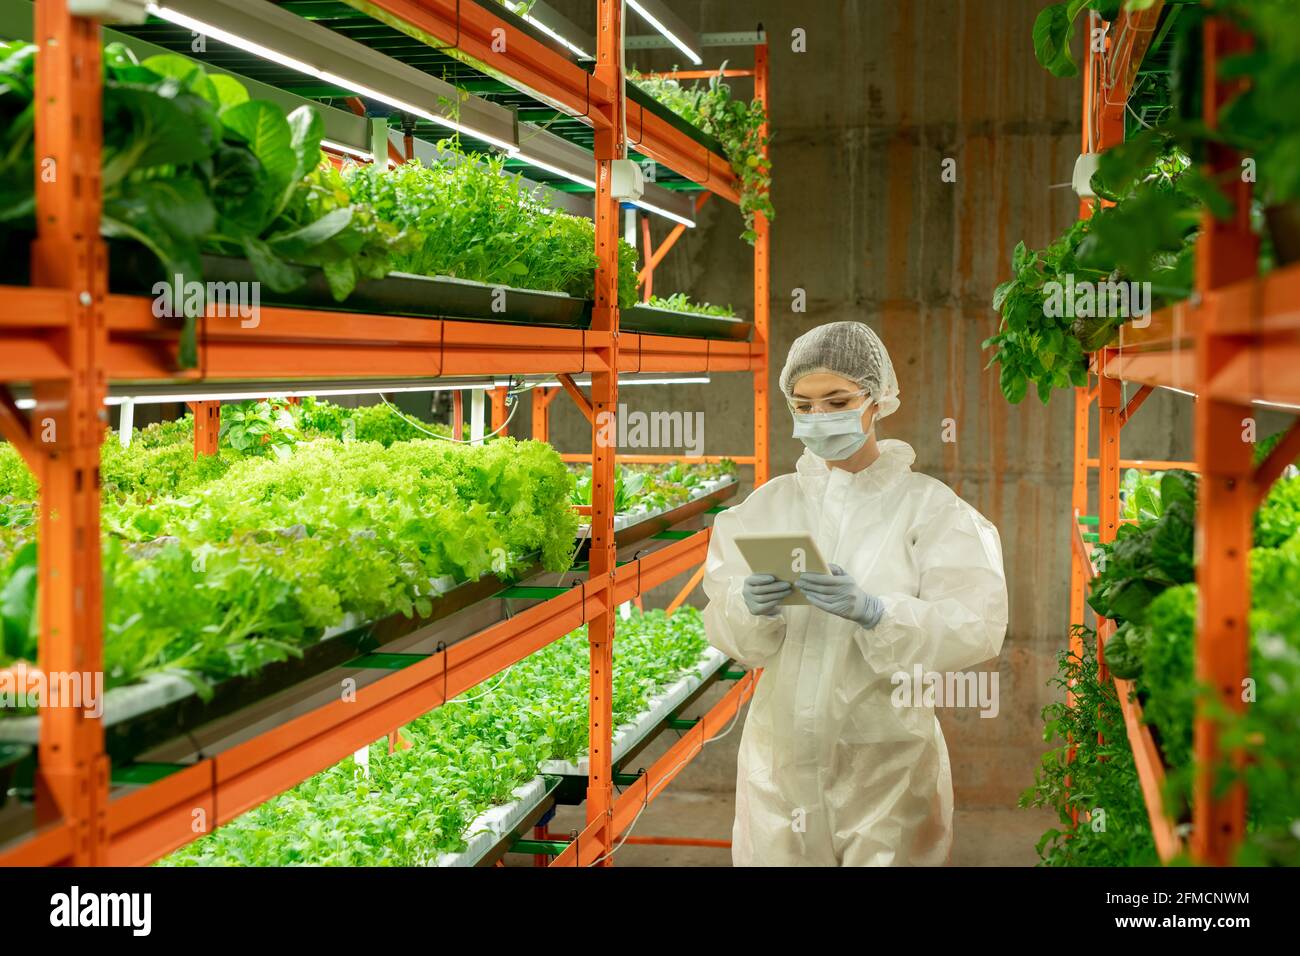 Young female agronomist in white suit, gloves and protective mask walking along vertical farm aisle and using tablet while analyzing growth of plants Stock Photo